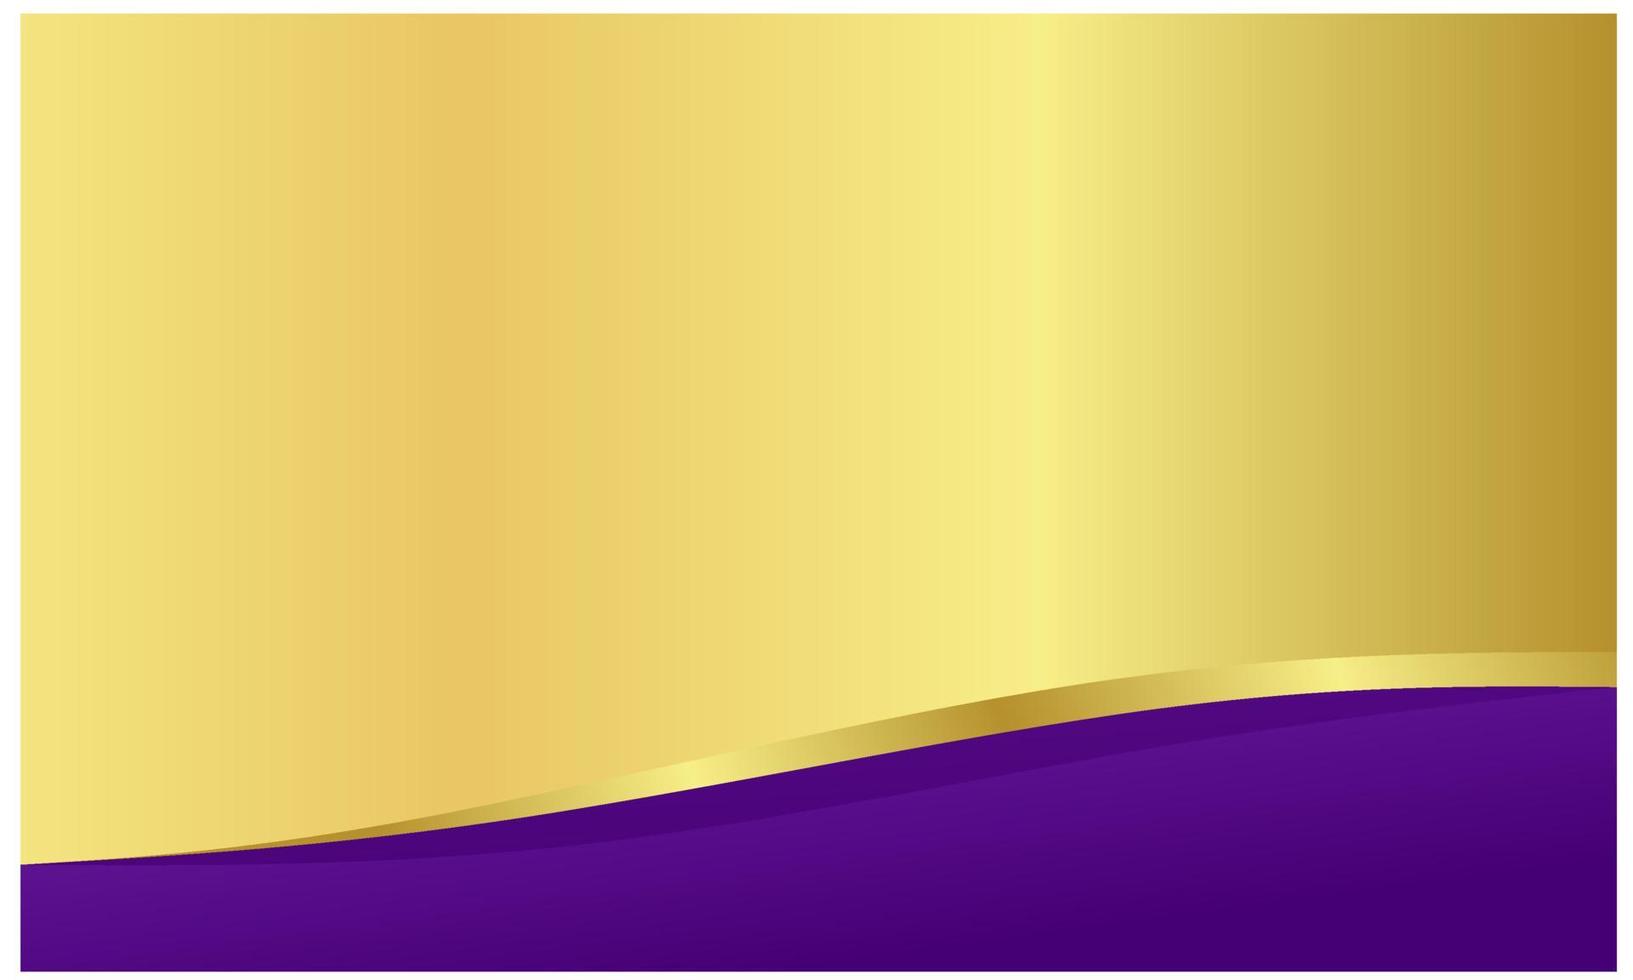 Stylish purple and gold background for presentations, banners, posters, business cards etc vector